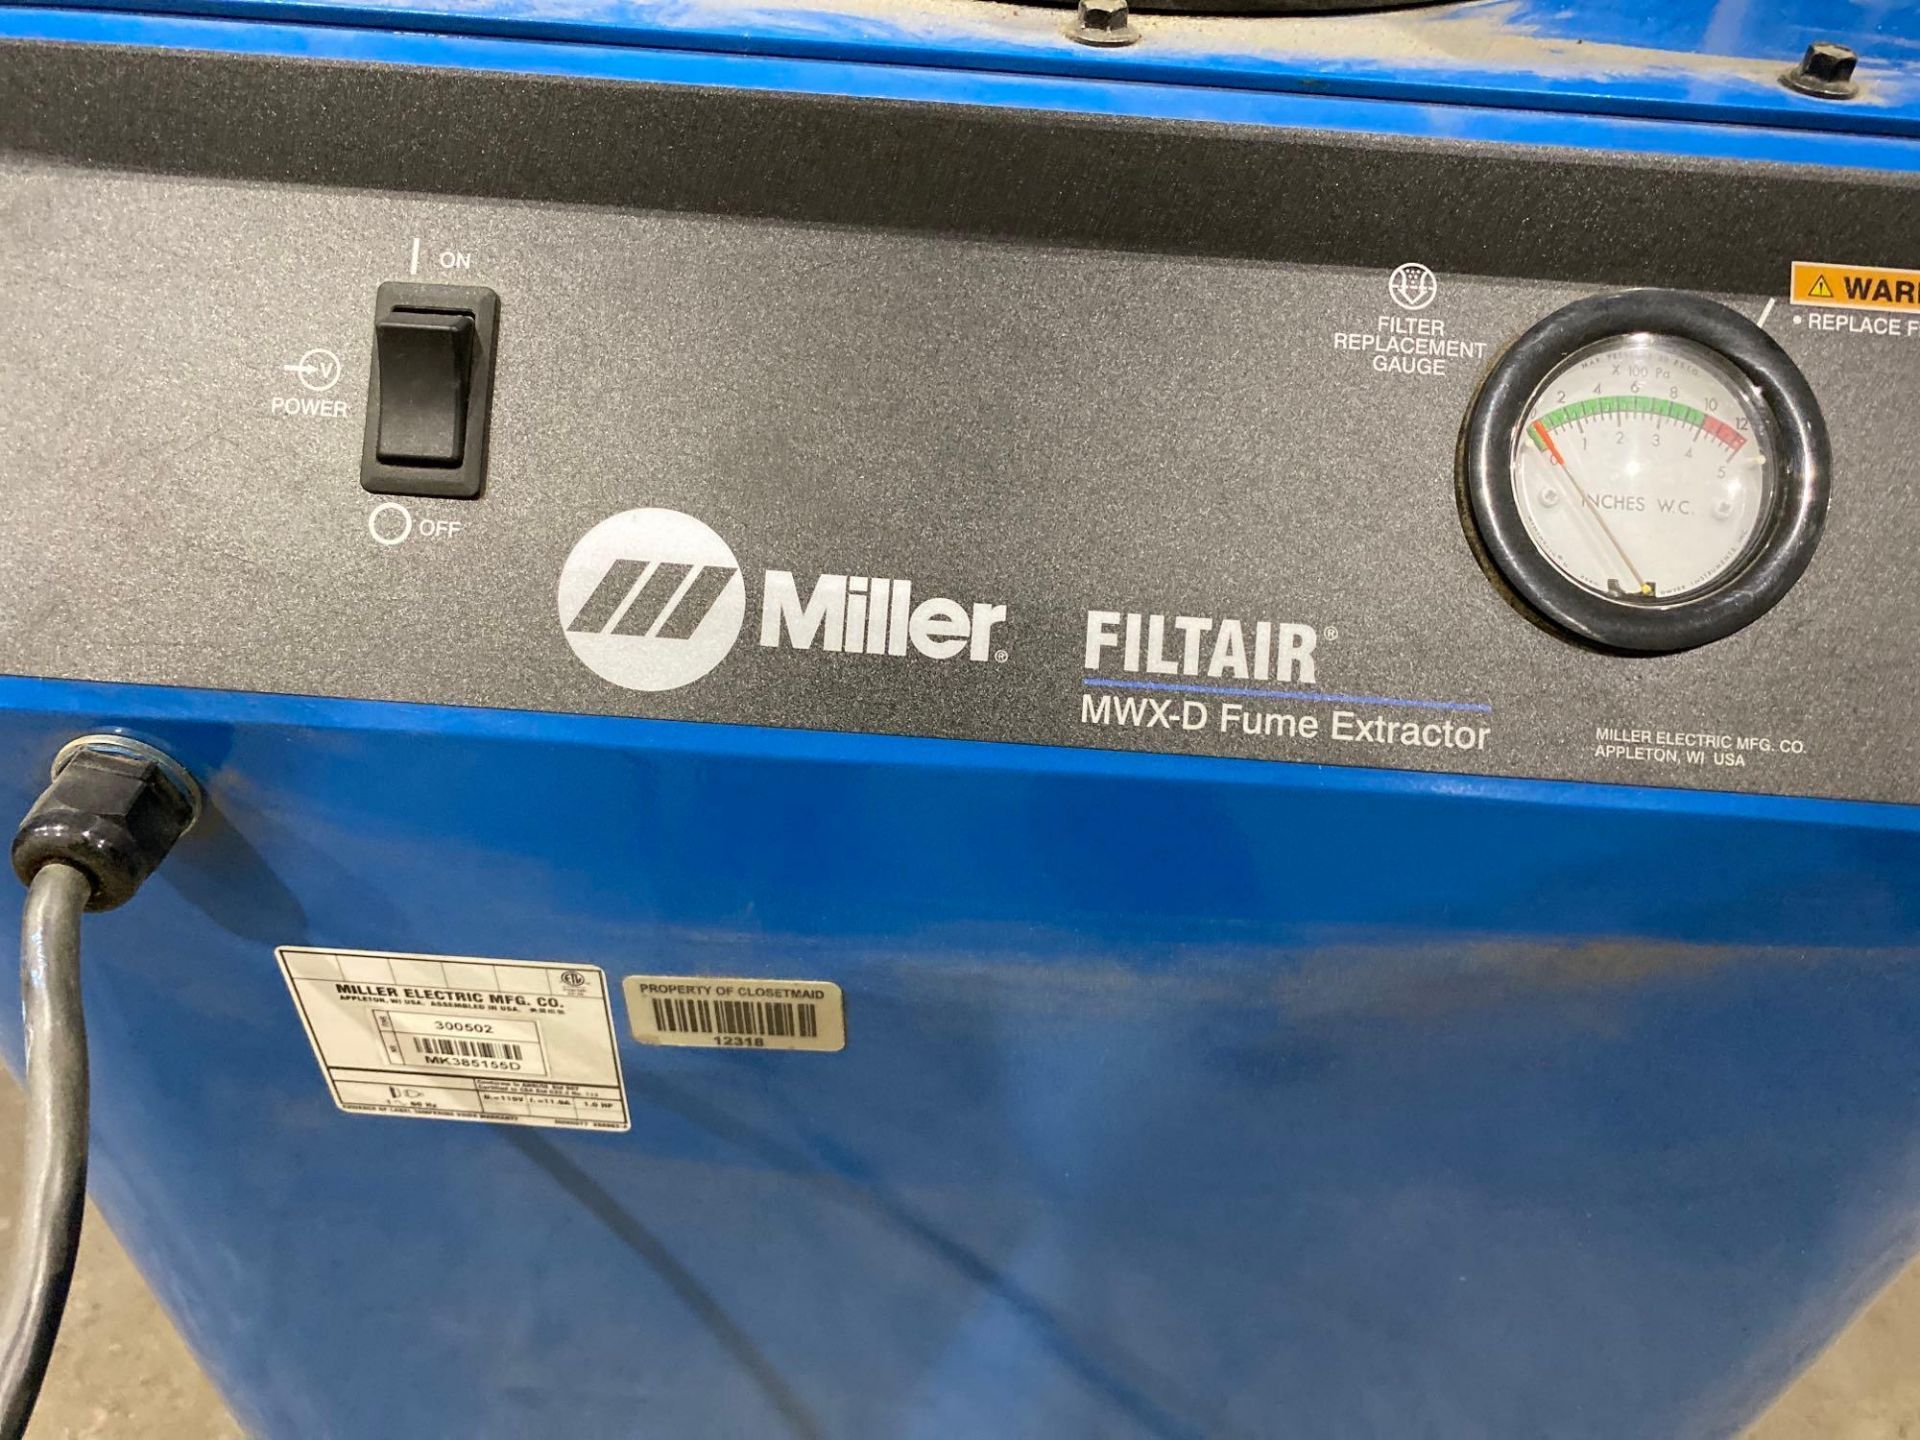 Miller Filtair MWX-D Fume Extractor - Image 2 of 3